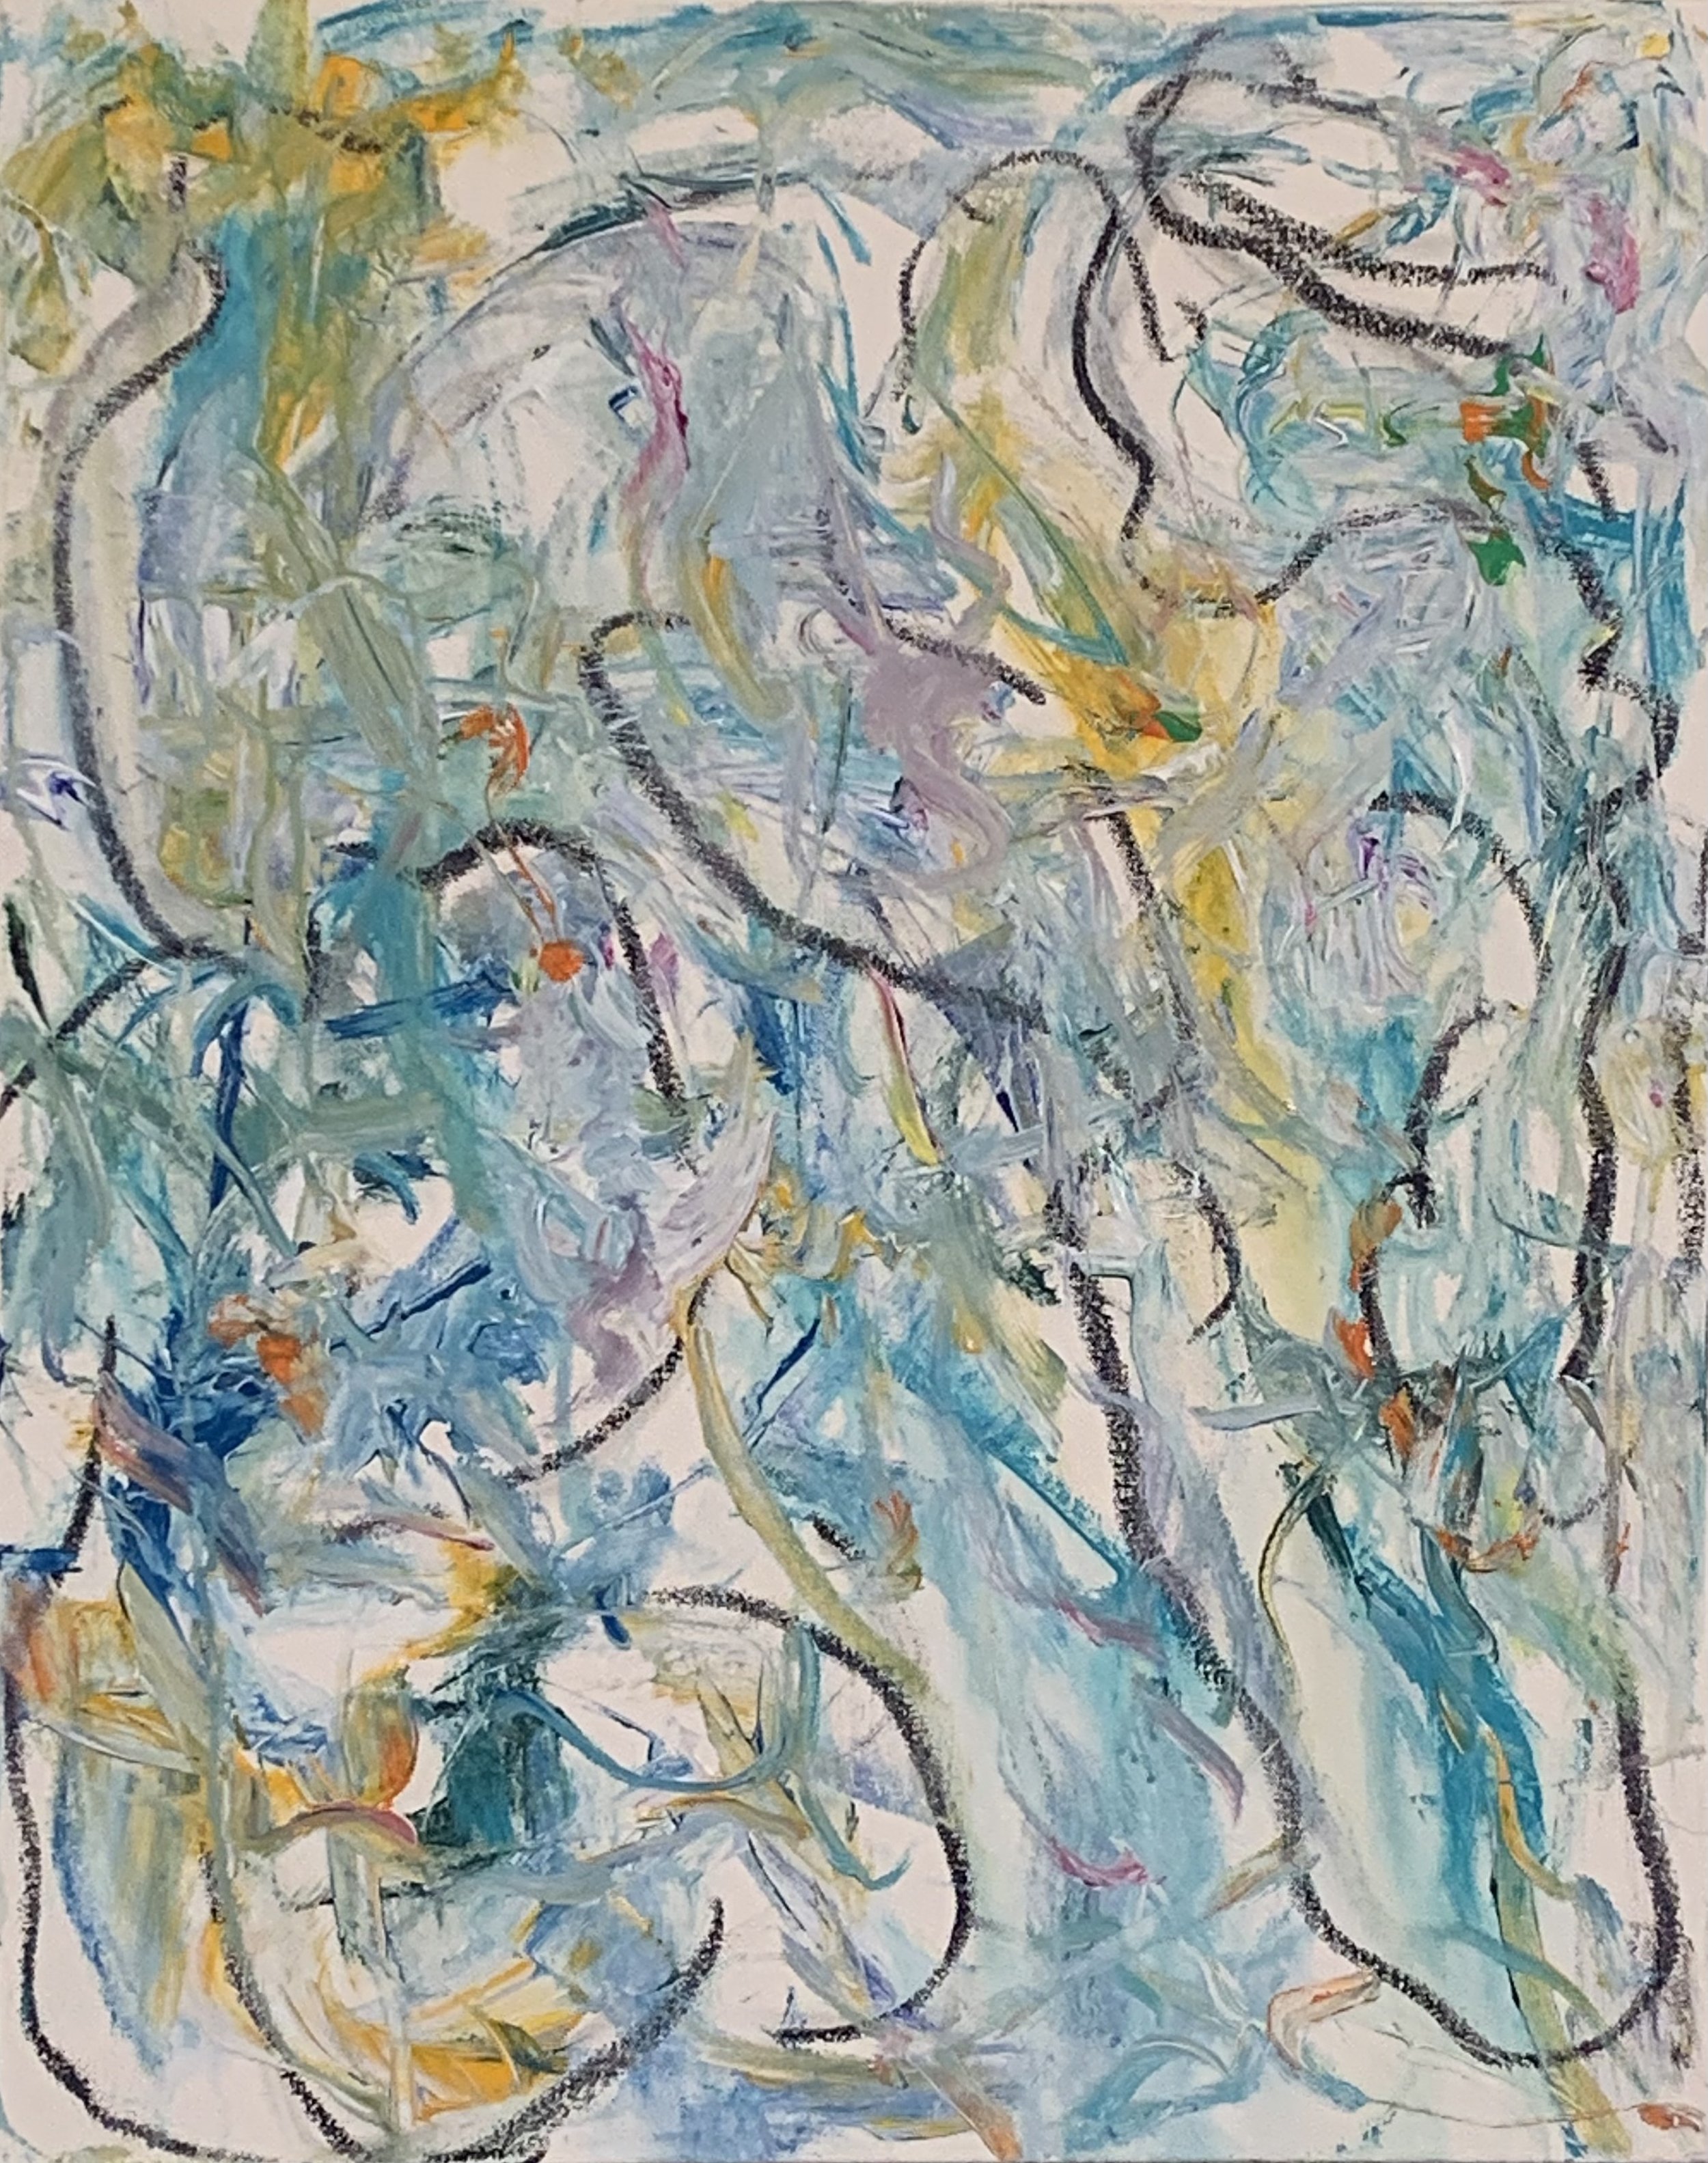 “Opening No. 74” acrylic, oil stick on canvas, 30”x24”